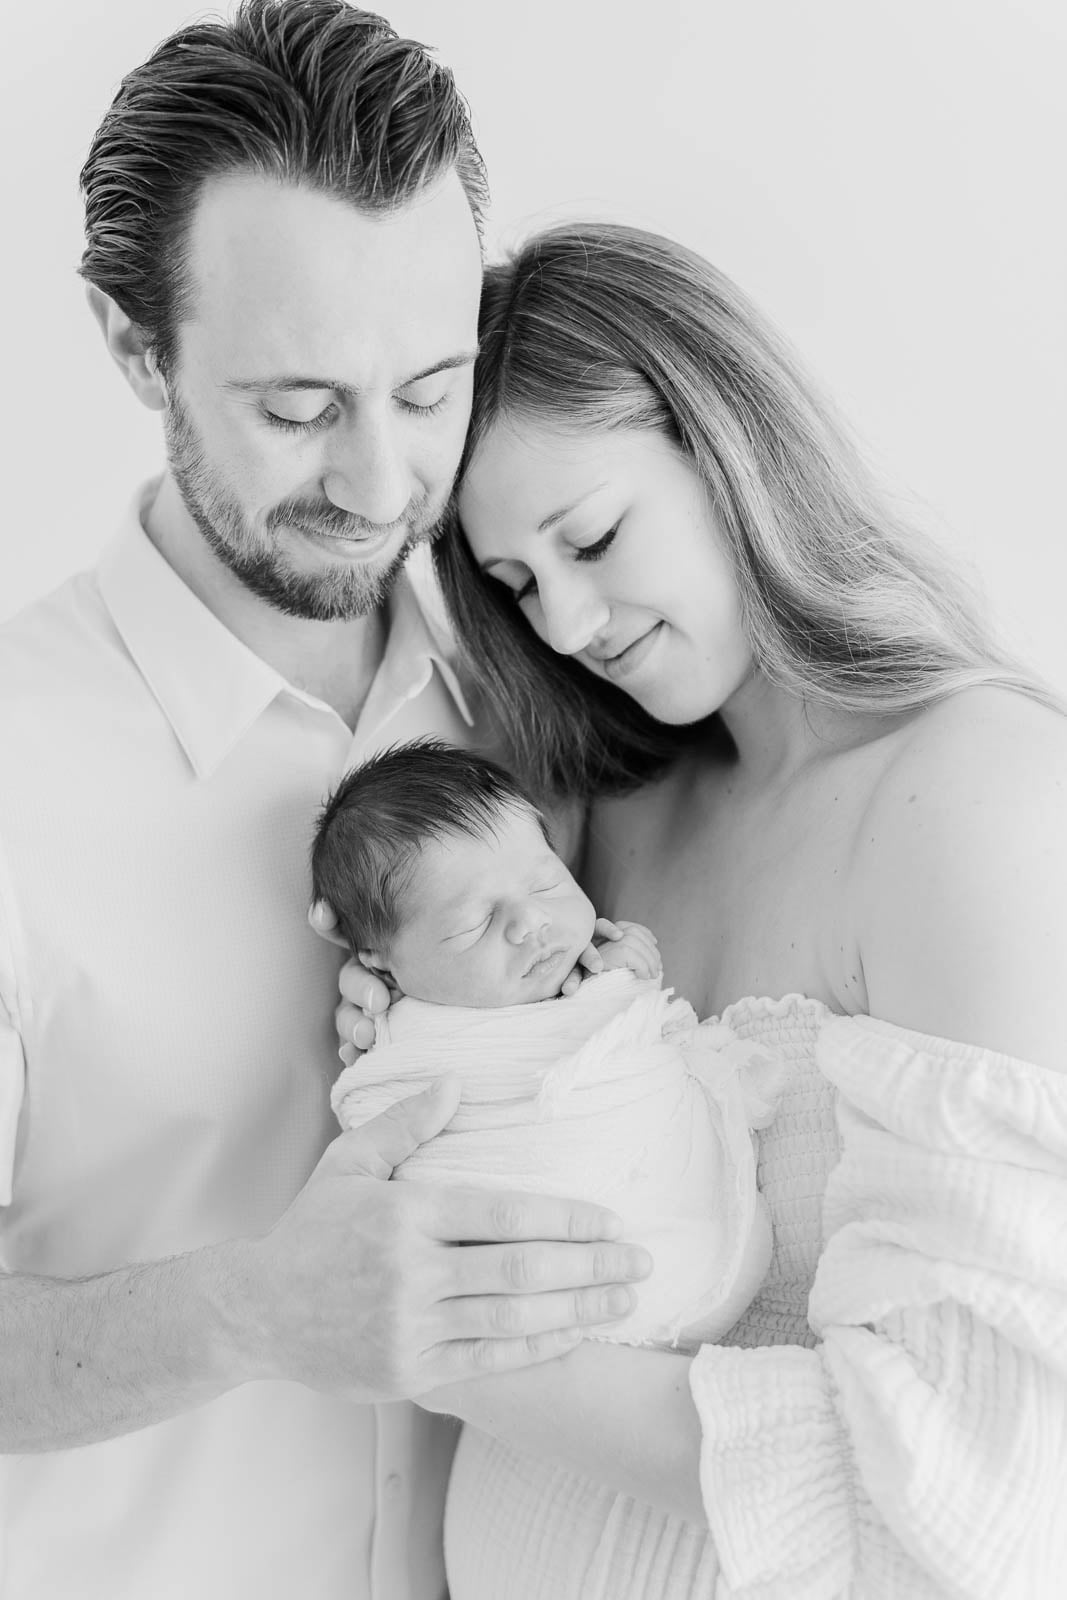 Intimate black and white portrait by a Chicago maternity photographer featuring a loving couple cradling their newborn baby.